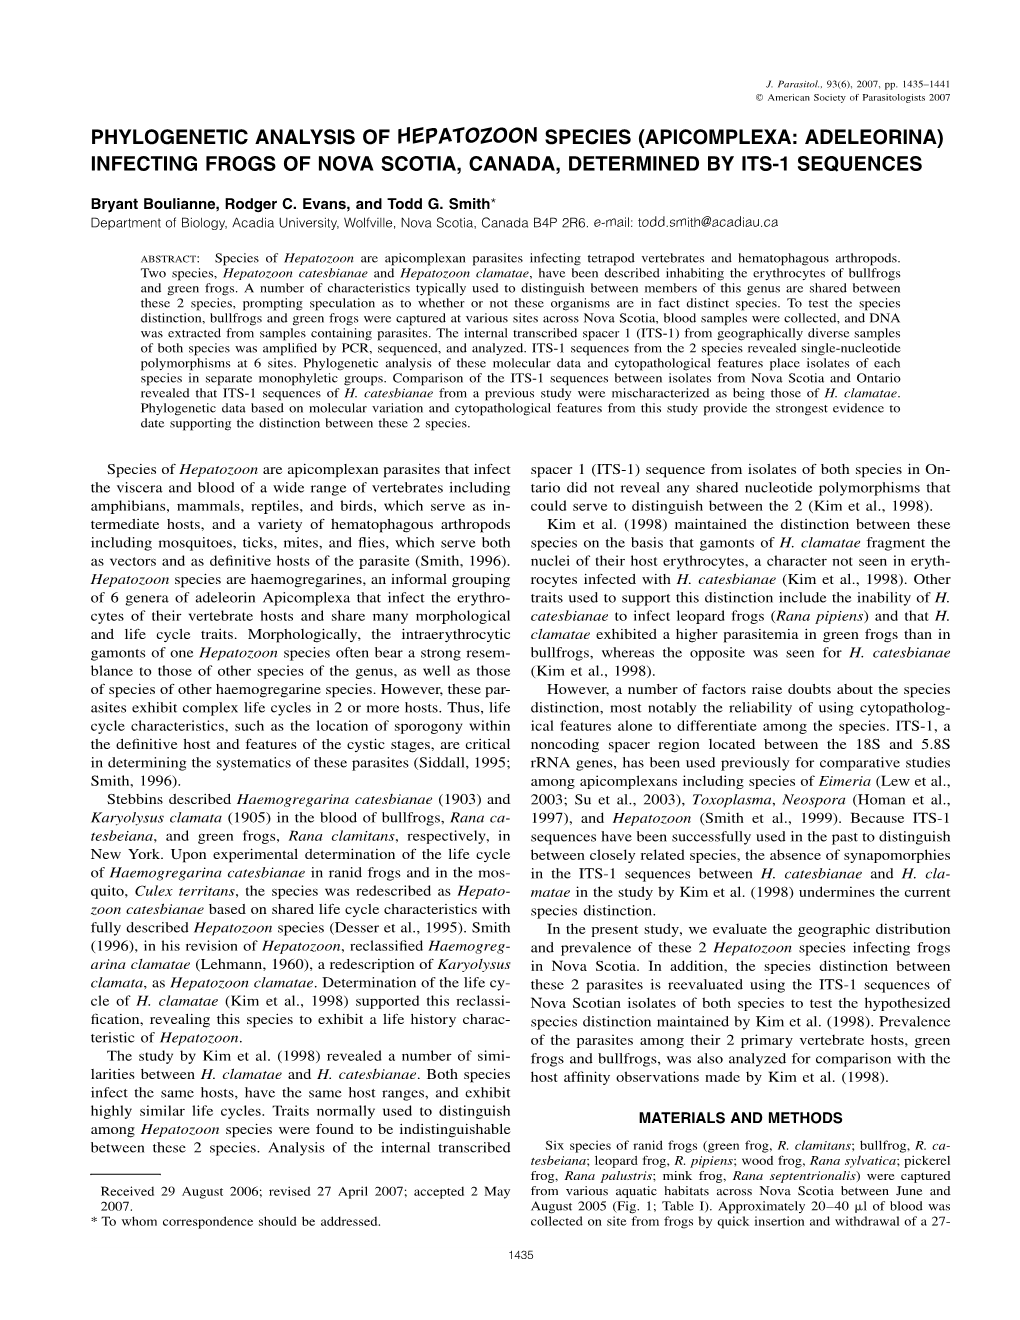 Phylogenetic Analysis of Hepatozoon Species (Apicomplexa: Adeleorina) Infecting Frogs of Nova Scotia, Canada, Determined by Its-1 Sequences